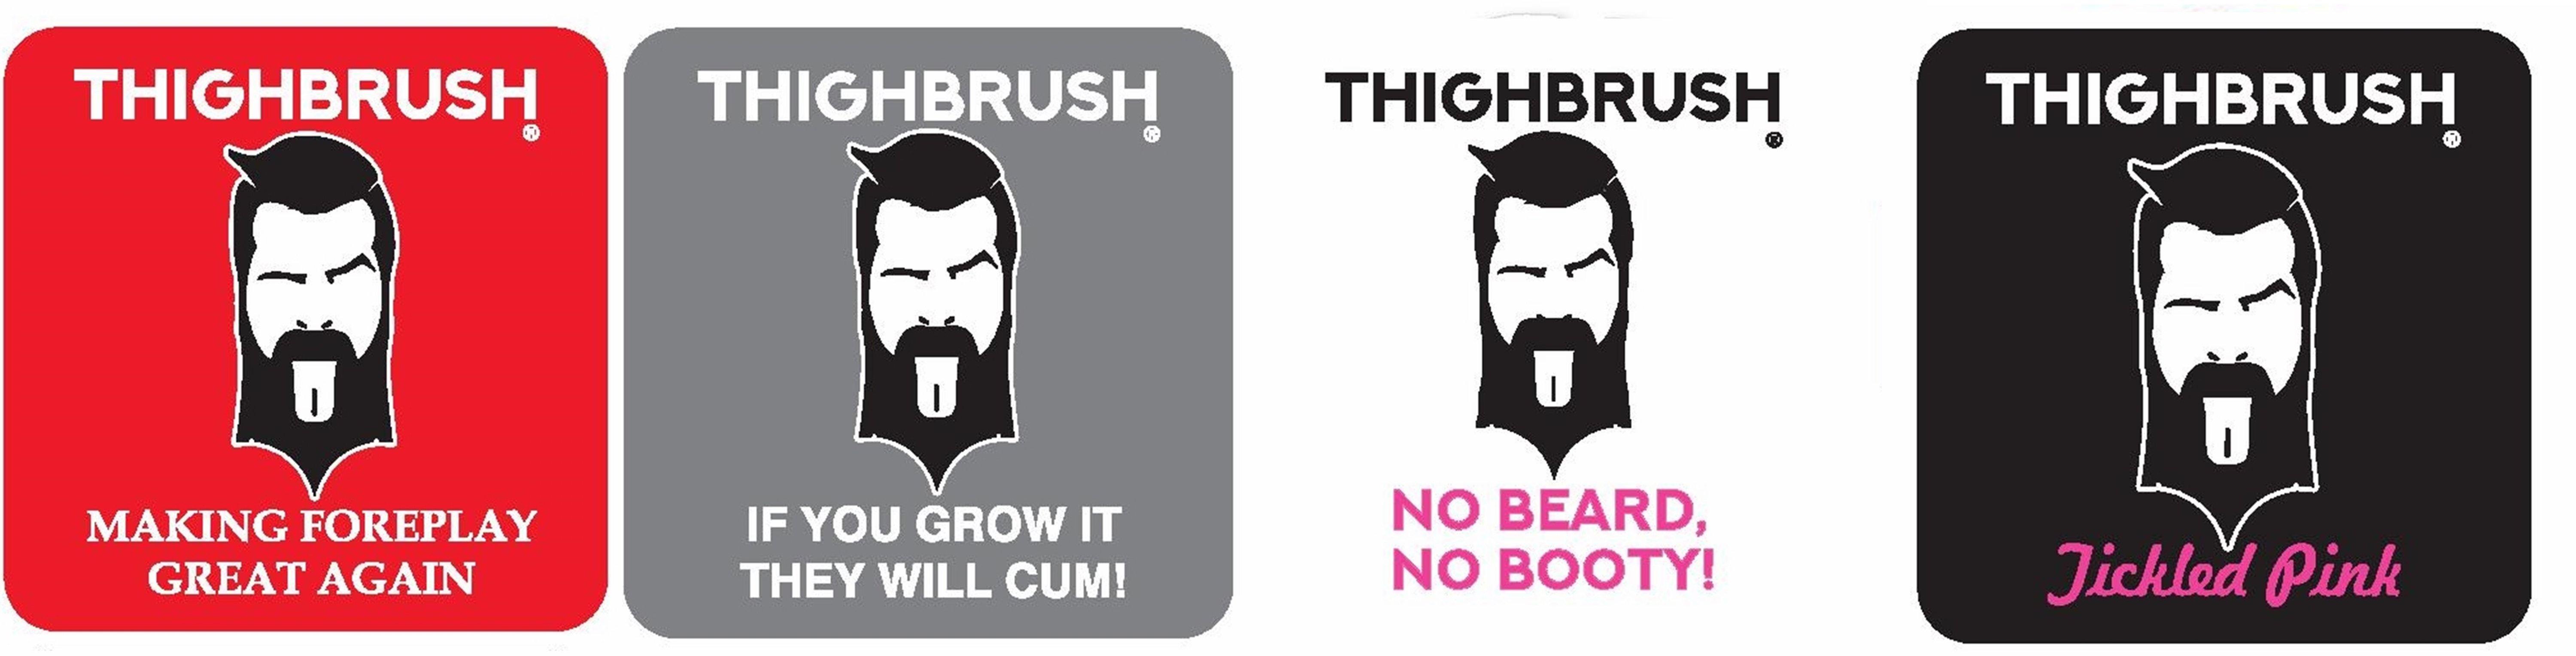 THIGHBRUSH® If You Grow it, they will Cum to be Released on